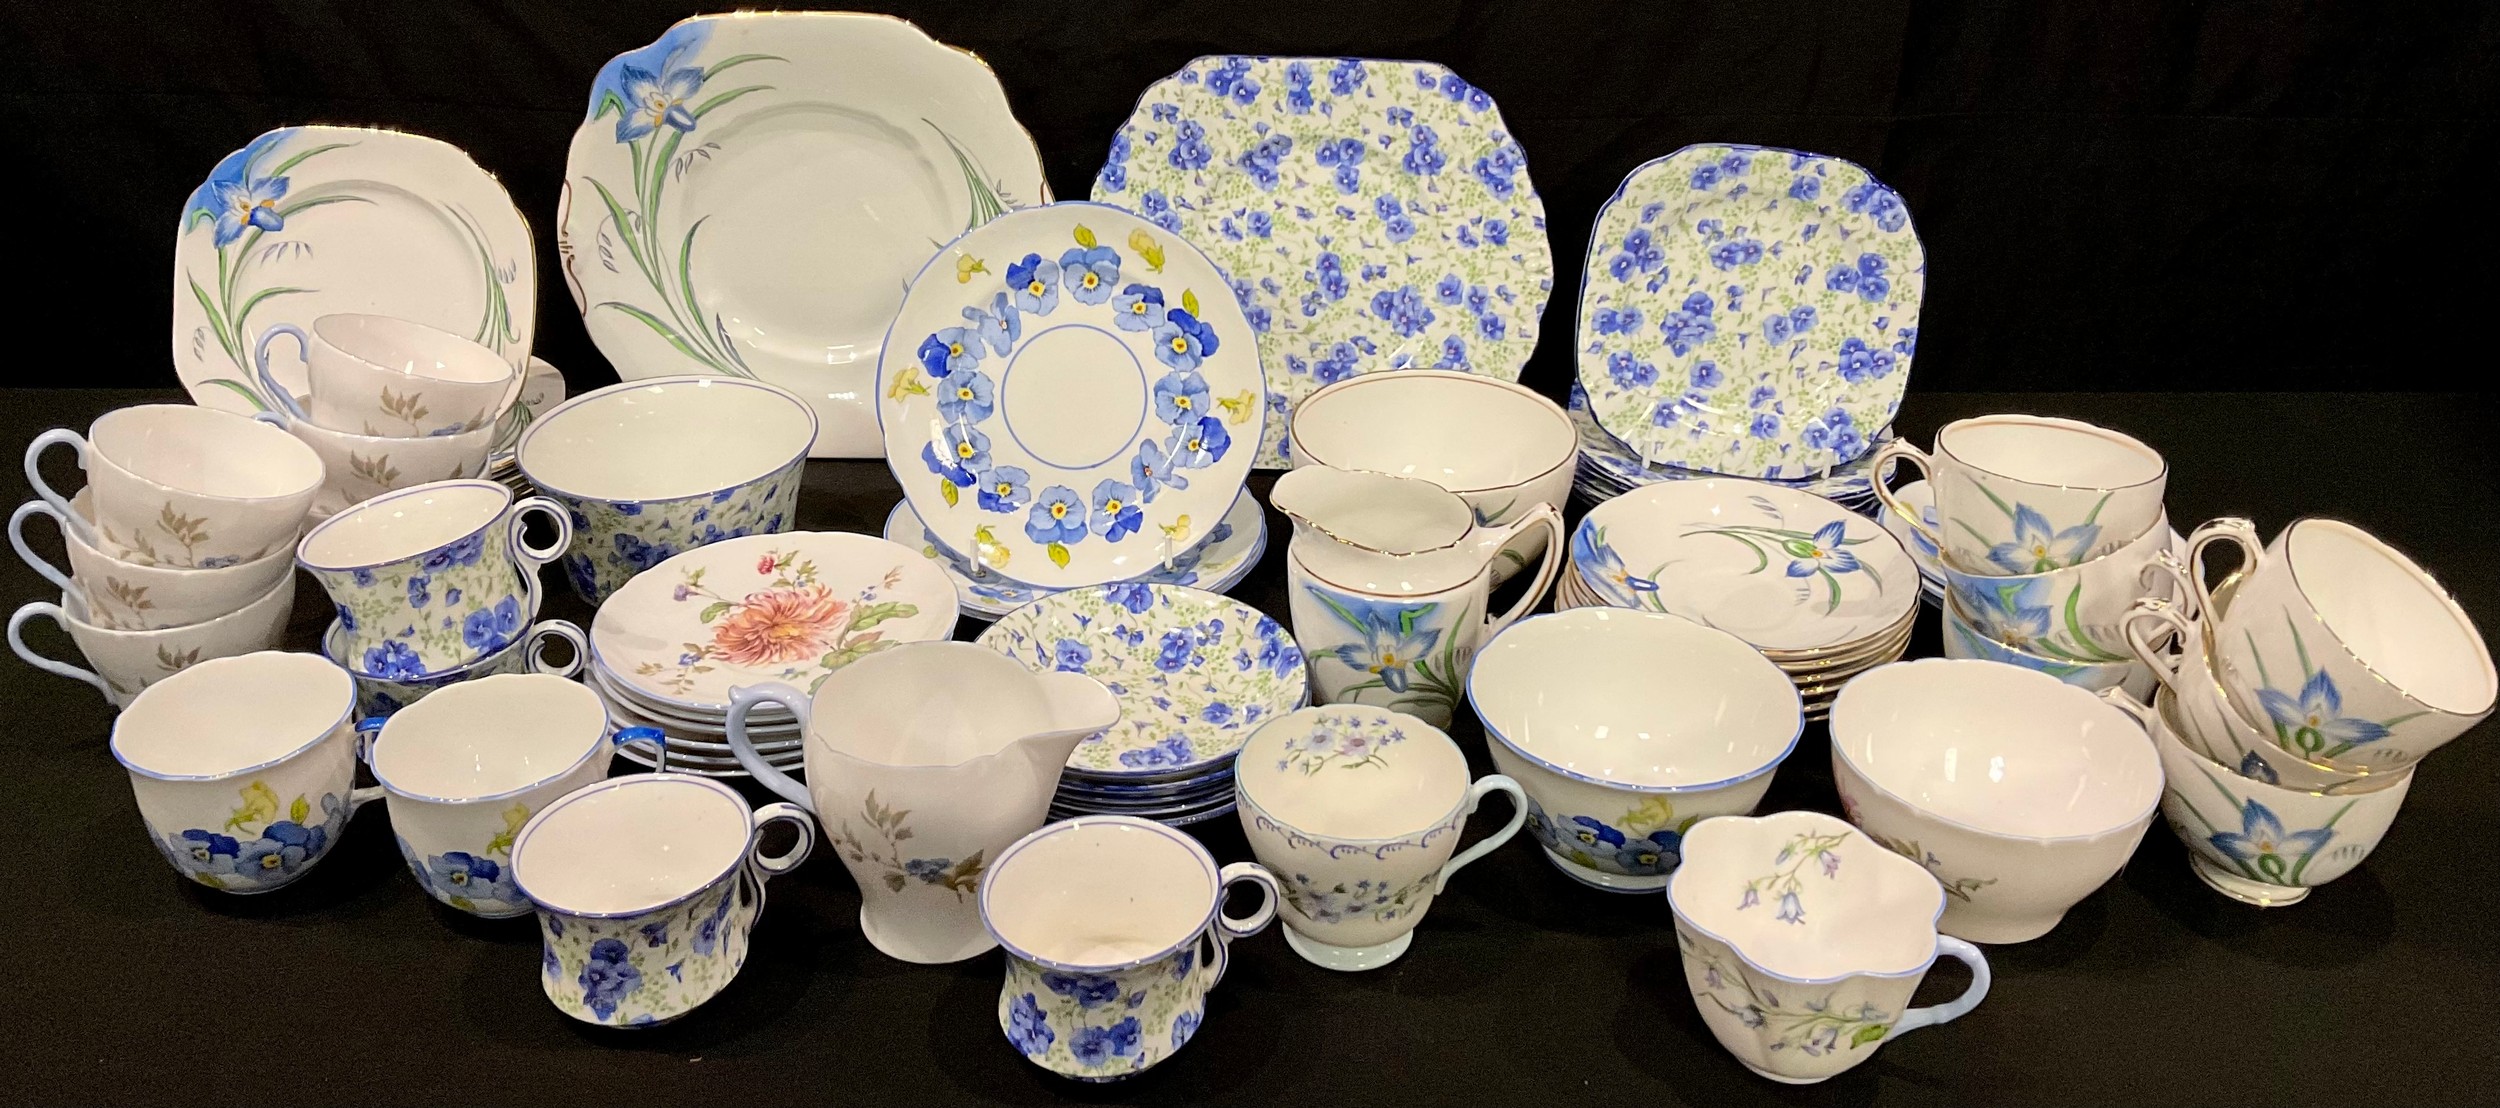 A Shelley Chrysanthemum pattern tea service for six comprising cream jug, sugar bowl, cups and